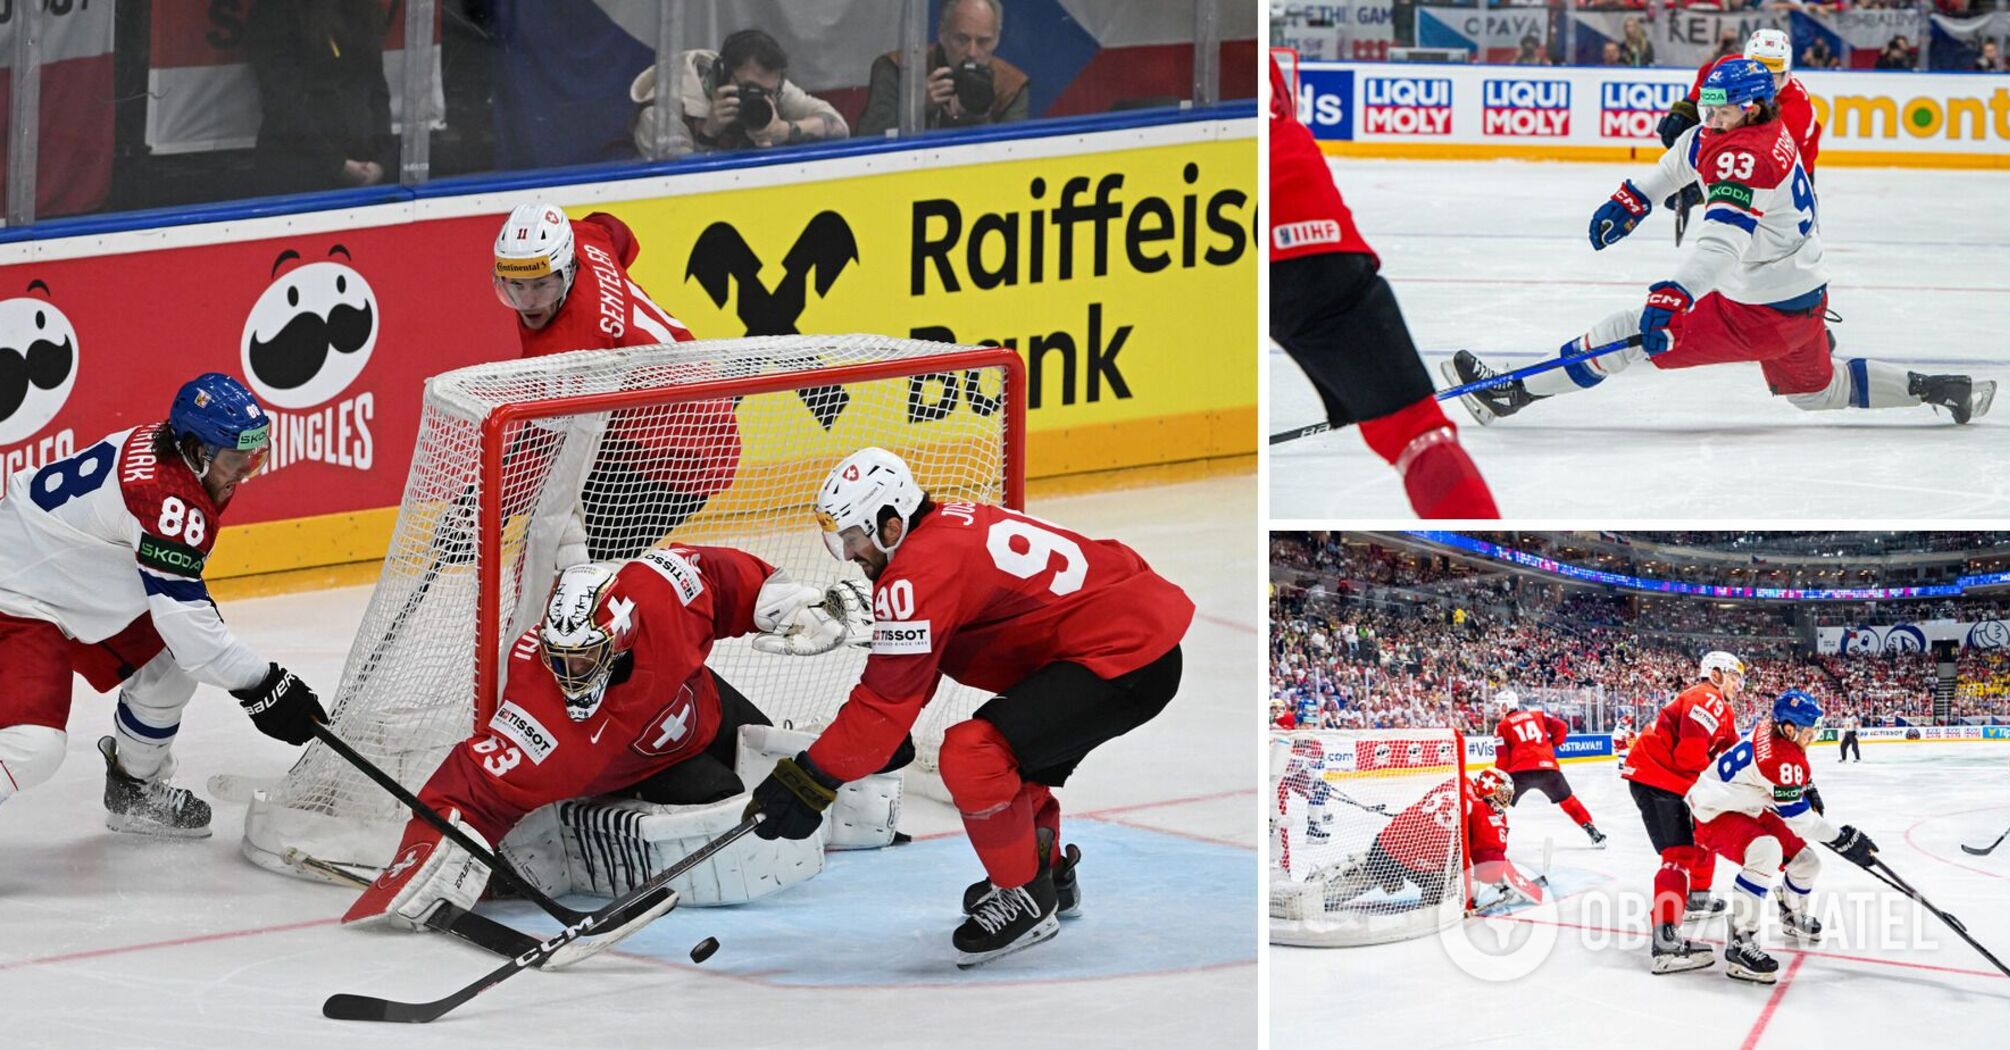 The winner of the World Ice Hockey Championship was determined in a tense final. Video